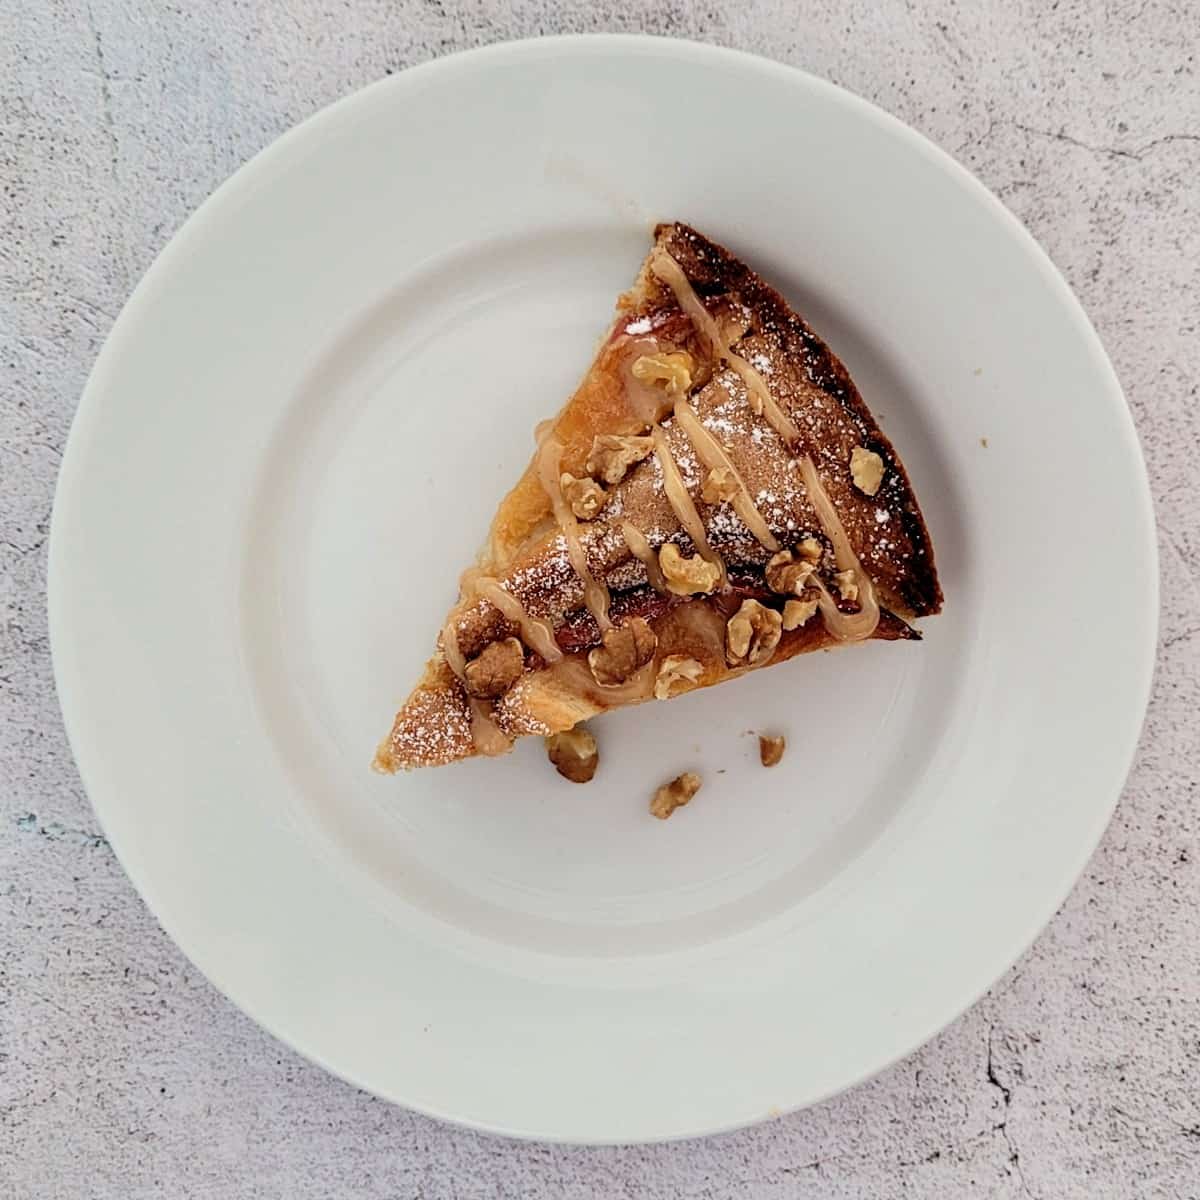 apple cake with walnuts and caramel